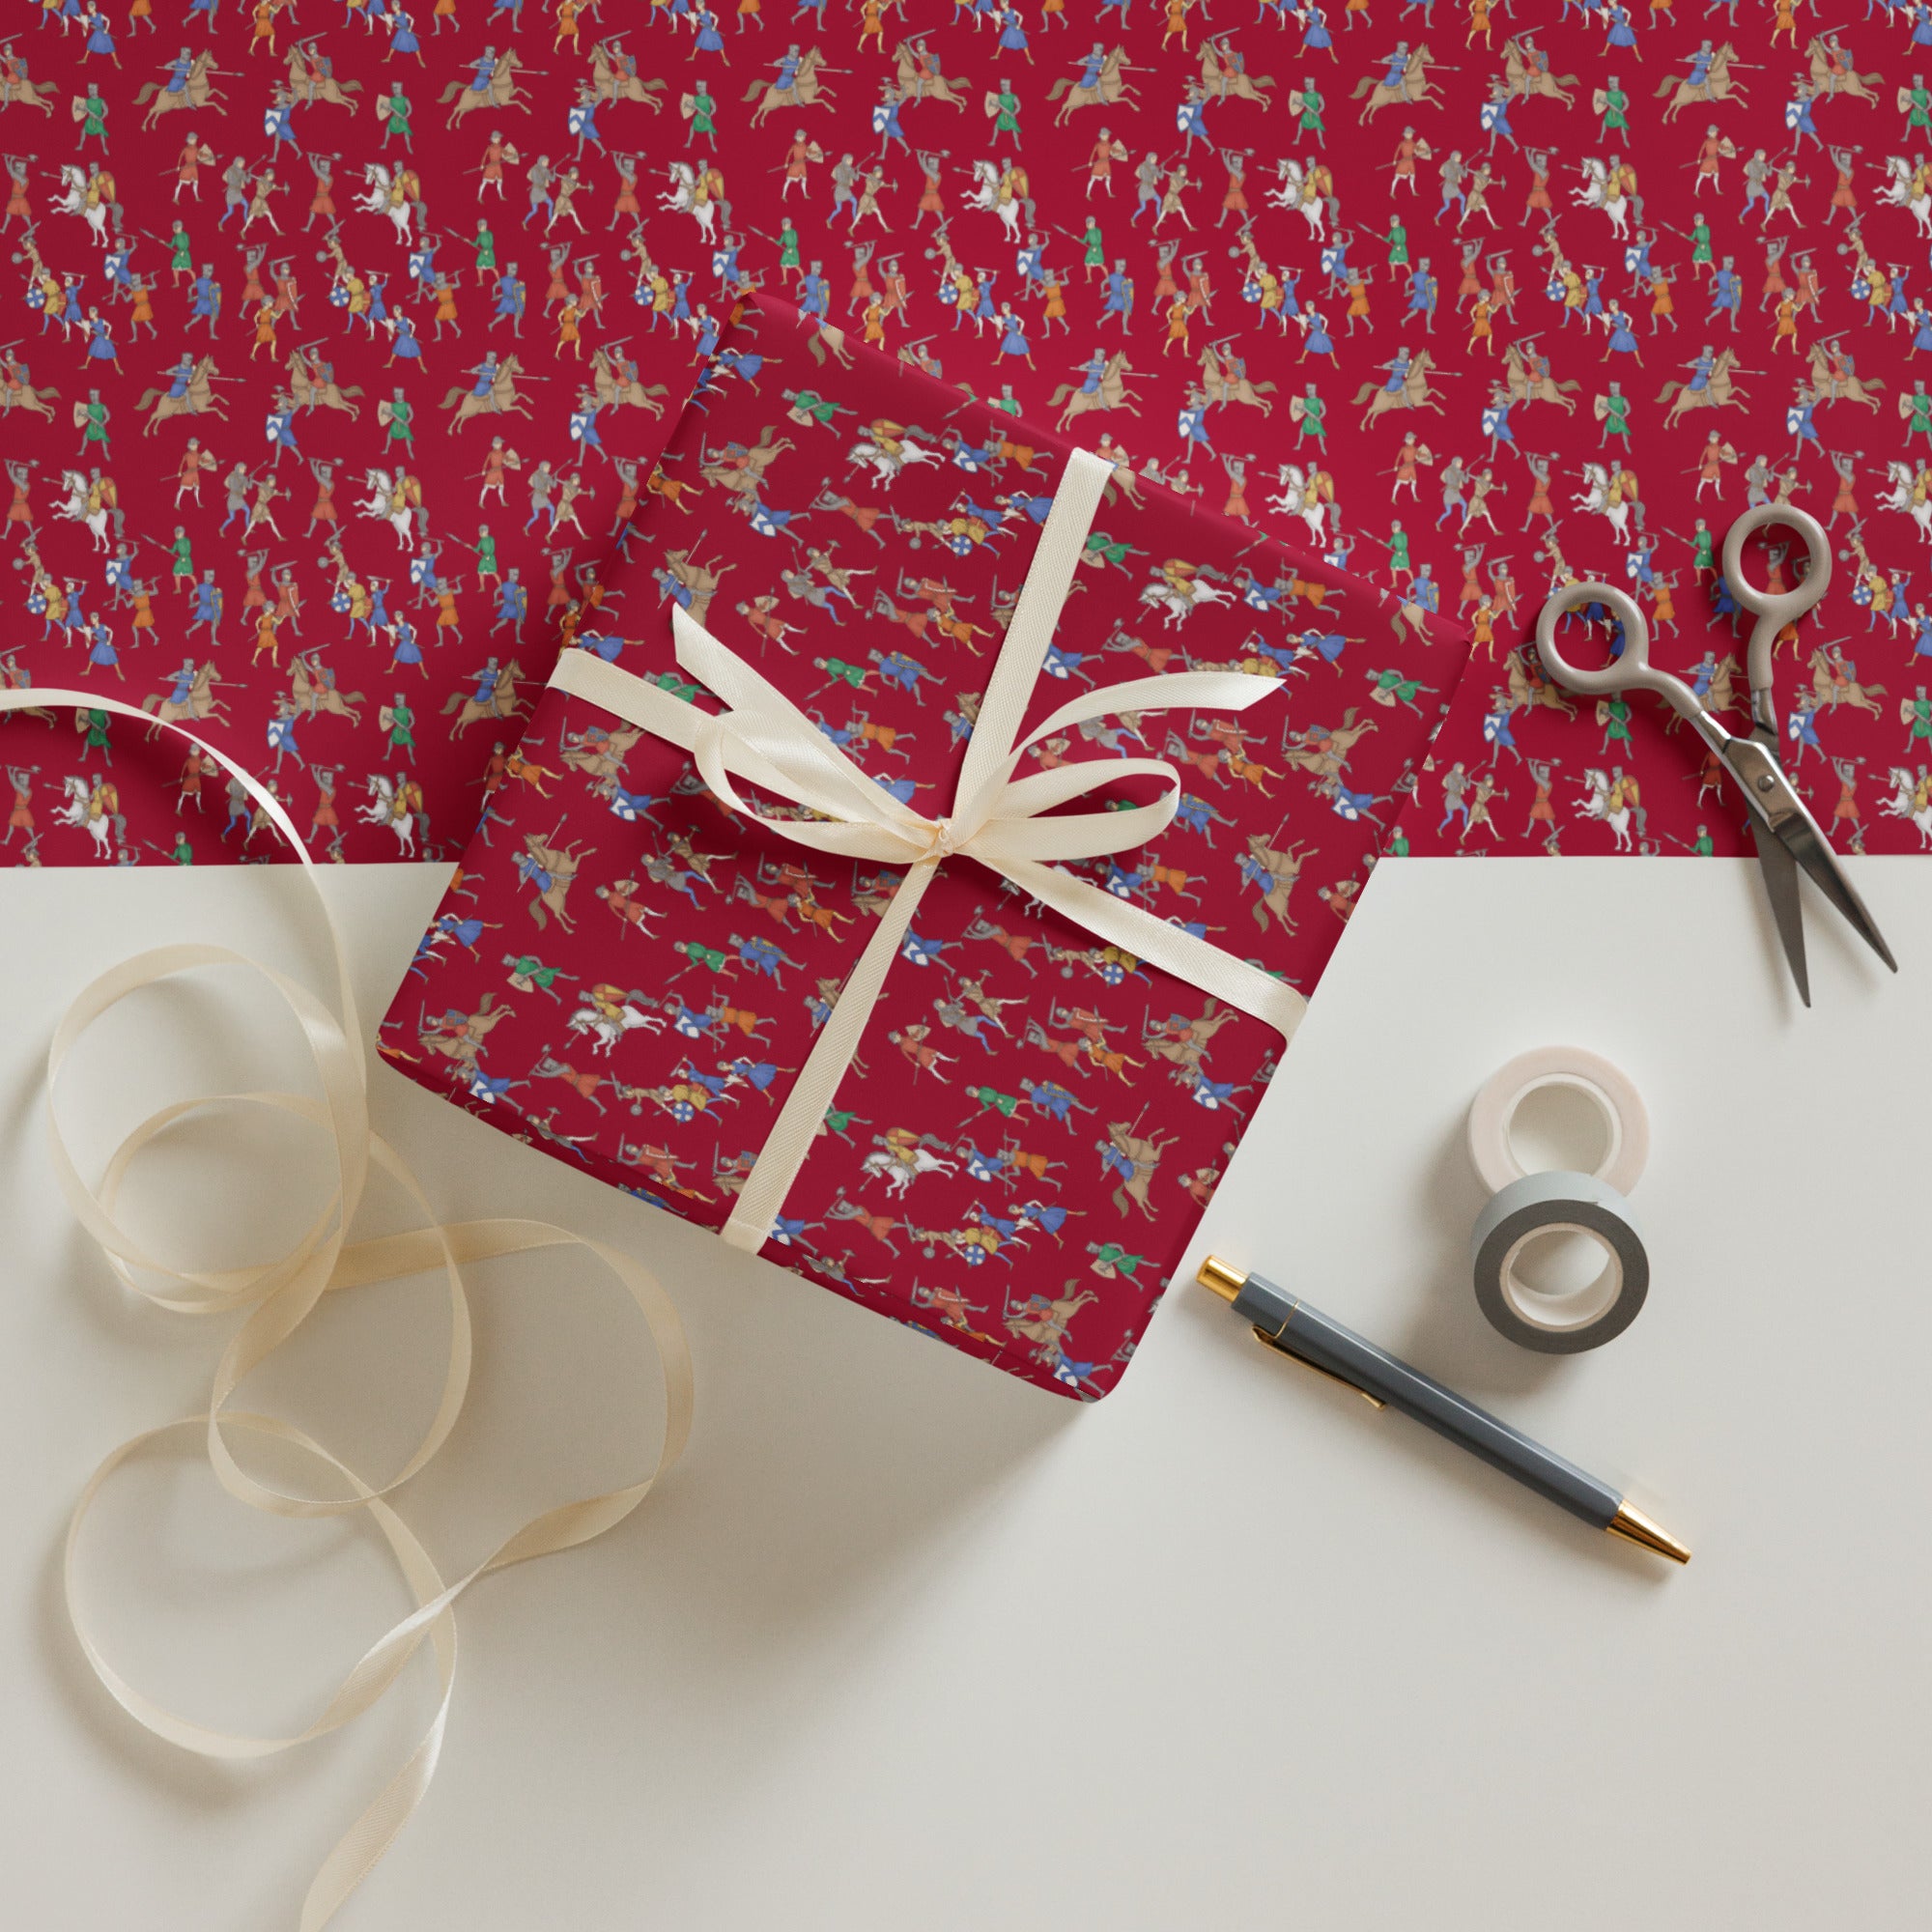 Medieval Battle Wrapping Paper